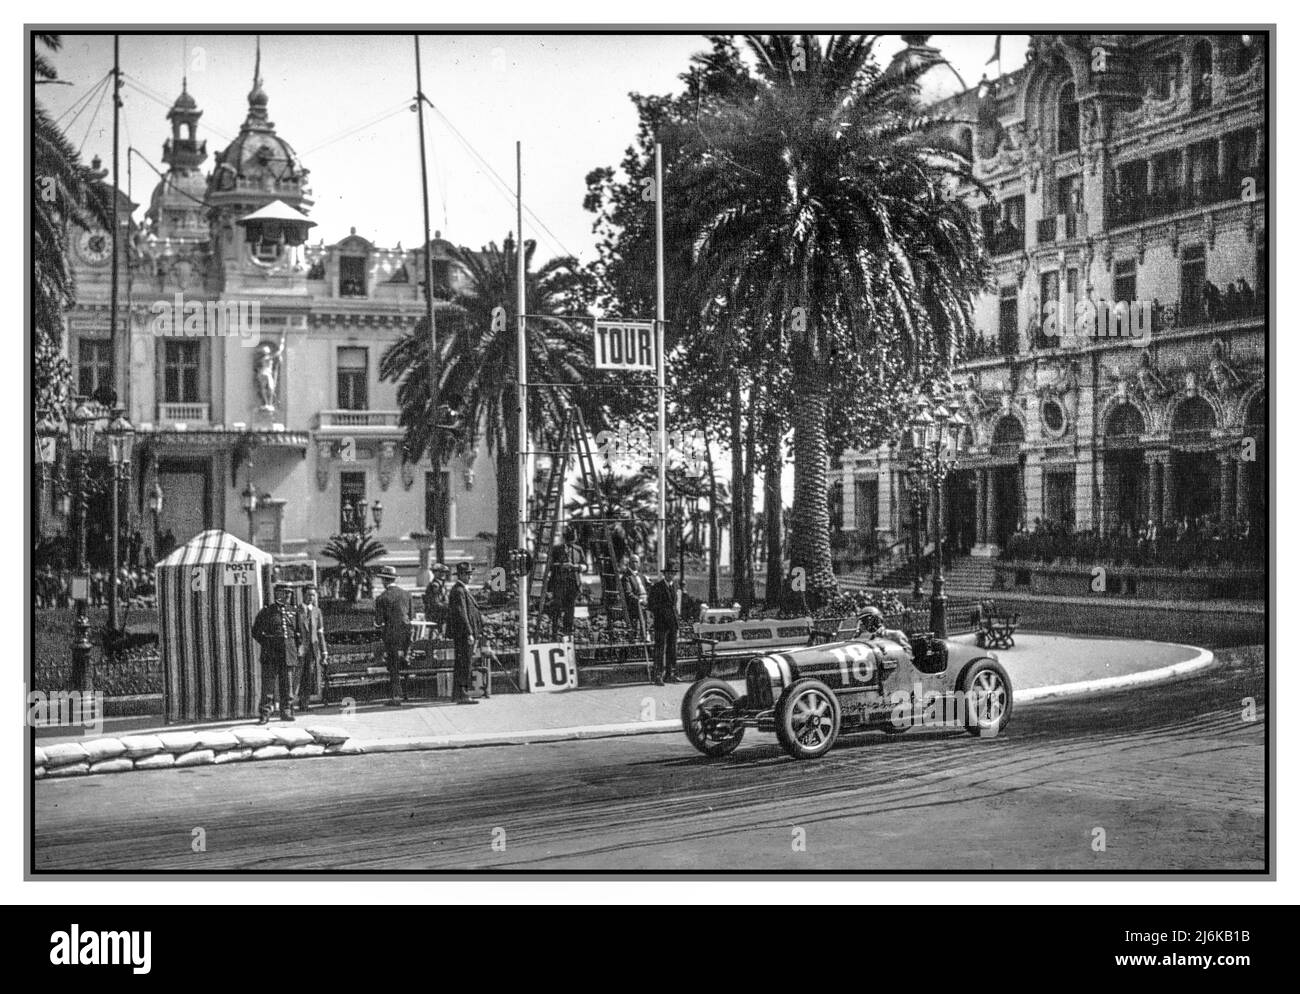 The 1930 Monaco Grand Prix with Louis Chiron (second place) in a works Bugatti.  A Grand Prix motor race held at the Circuit de Monaco on 6 April 1930. Frenchman René Dreyfus won the race in a privateer Bugatti, ahead of the works Bugatti 35 C of Louis Chiron seen here Number 18 who came in second, pictured with the Casino de Monaco behind. Monaco Monte Carlo Riviera Stock Photo